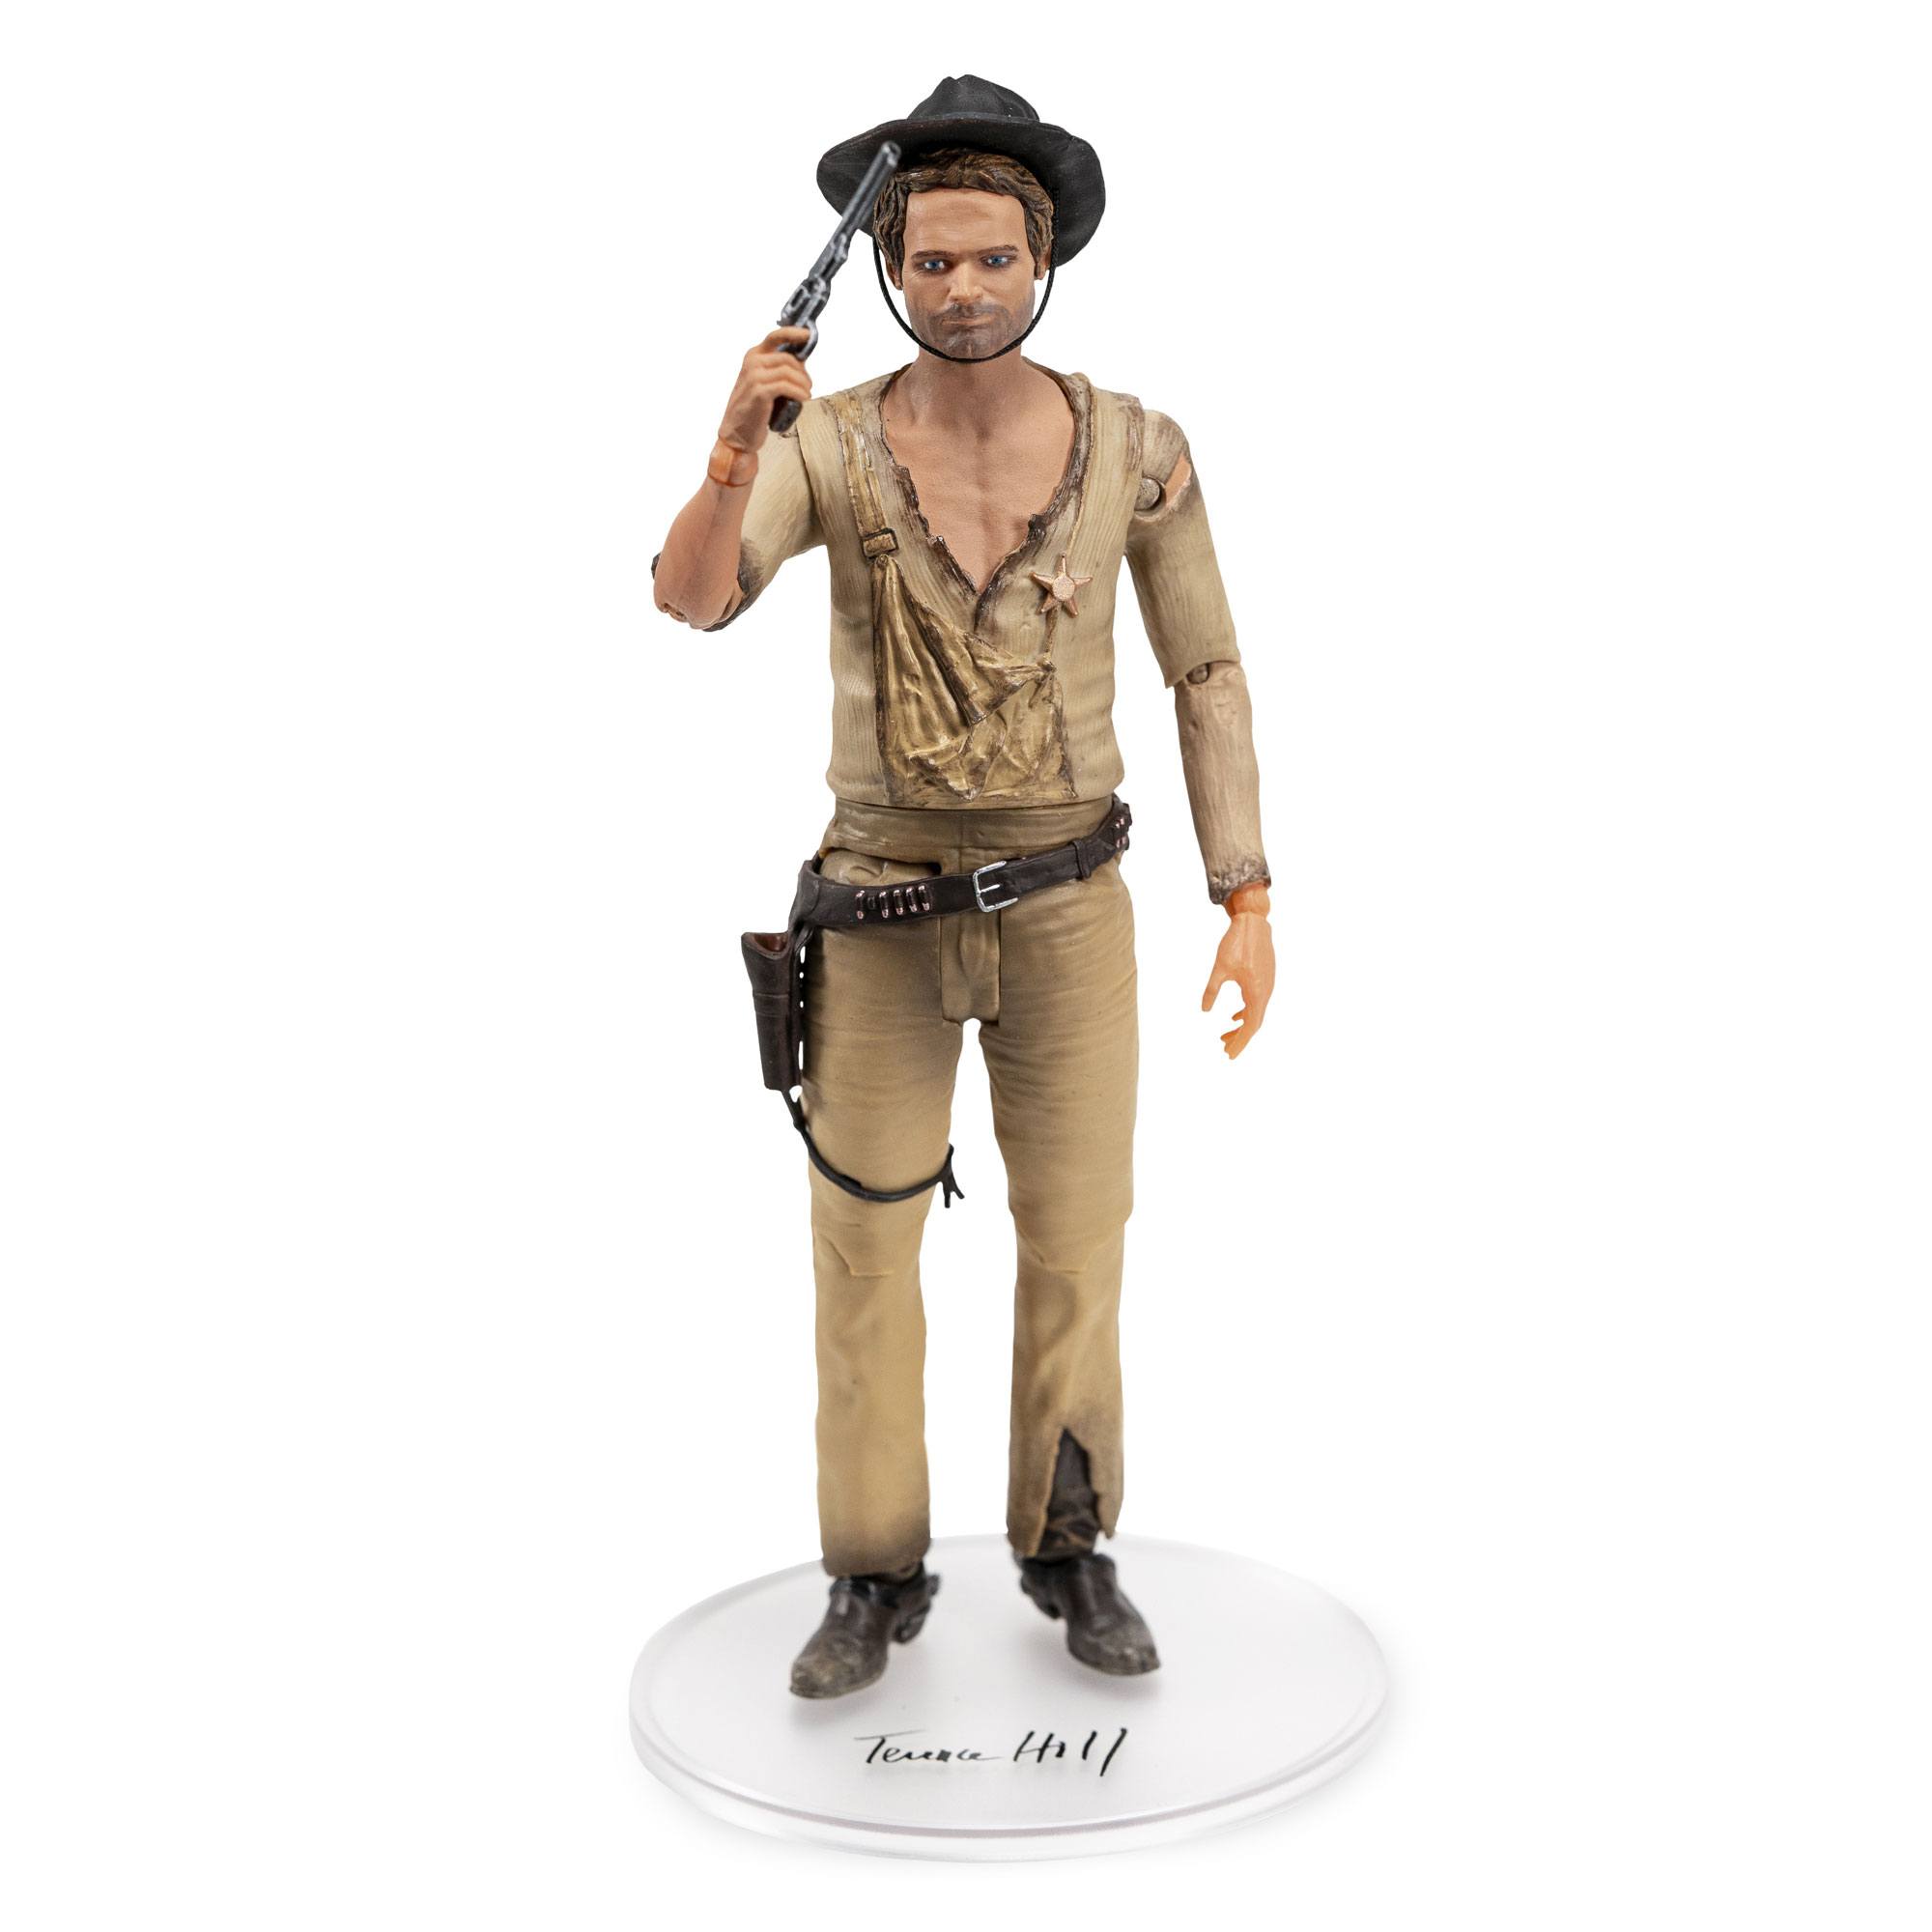 Terence Hill Actionfigur Trinity 18 cm ODT100002 4056133016391